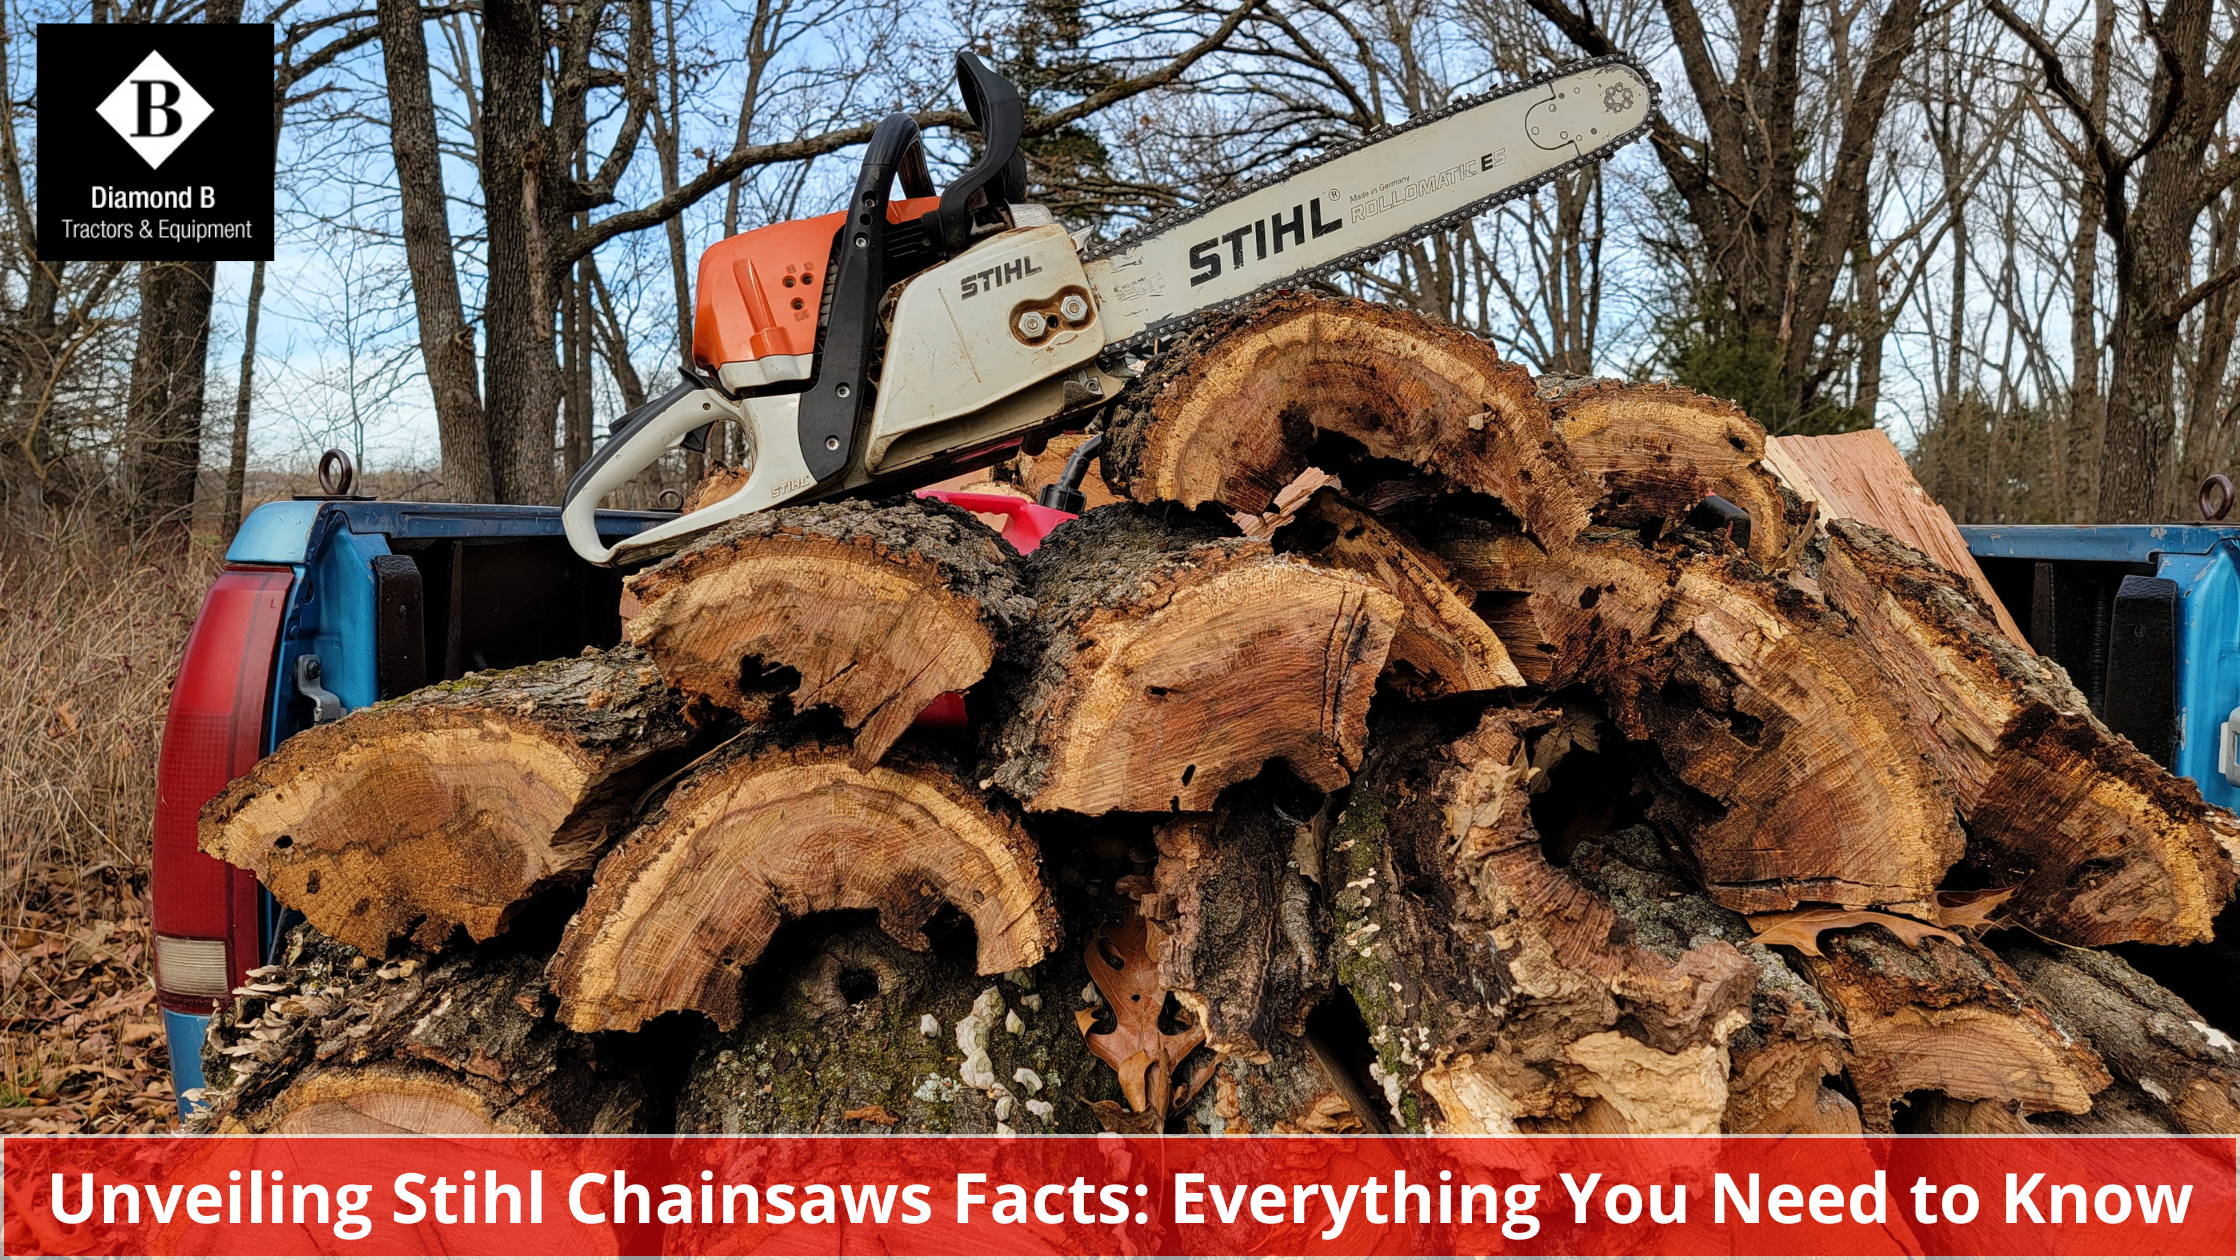 Unveiling Stihl Chainsaws Facts